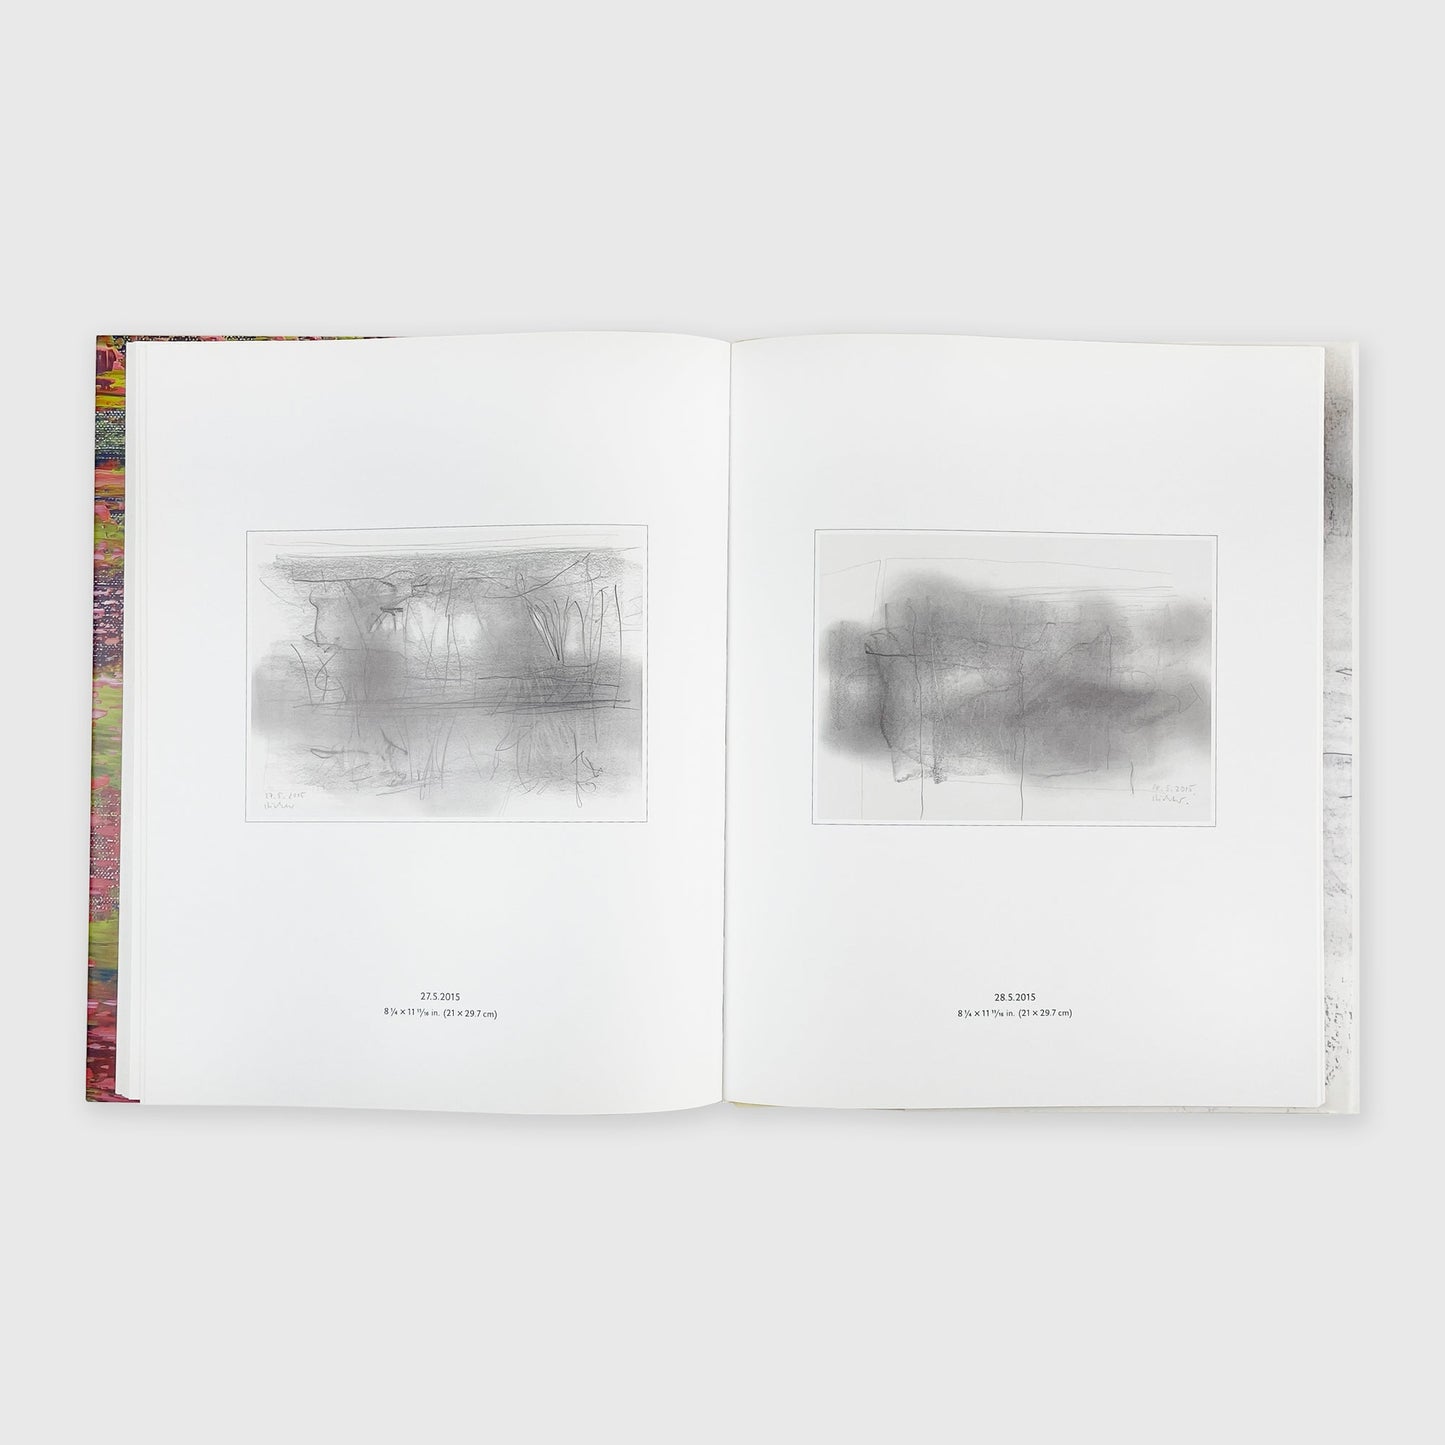 Gerhard Richter: Paintings and Drawings